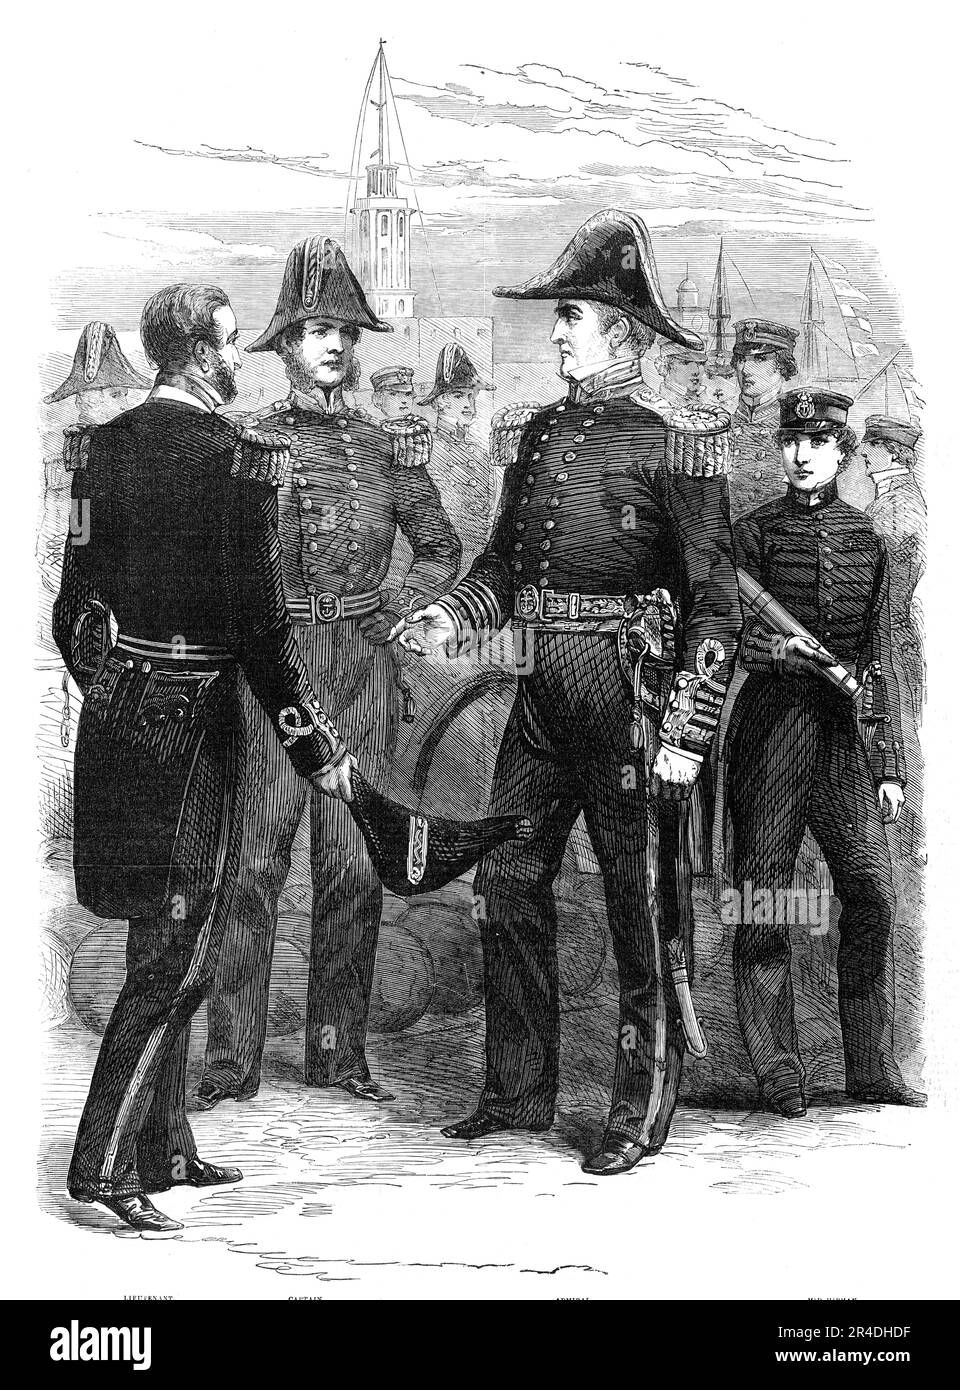 The New Naval Uniforms, 1856. In '...the Dress Uniform of the Admiral...there are to be three rows only of distinction lace on the sleeves; and the epaulets have lace straps with three stars, within the crescent, above them crossed sword and baton, surmounted by a crown. The coat is of blue cloth with white collar; the trousers are of blue cloth, with 1&#xbd; inch gold lace down the outside seam; the embroidery of the epaulets and the sword-knot and belt is very handsome, especially the gold oak-leaves and acorns, and the clasp, with crown, anchor, and laurel. The sword, with solid hilt, half Stock Photo